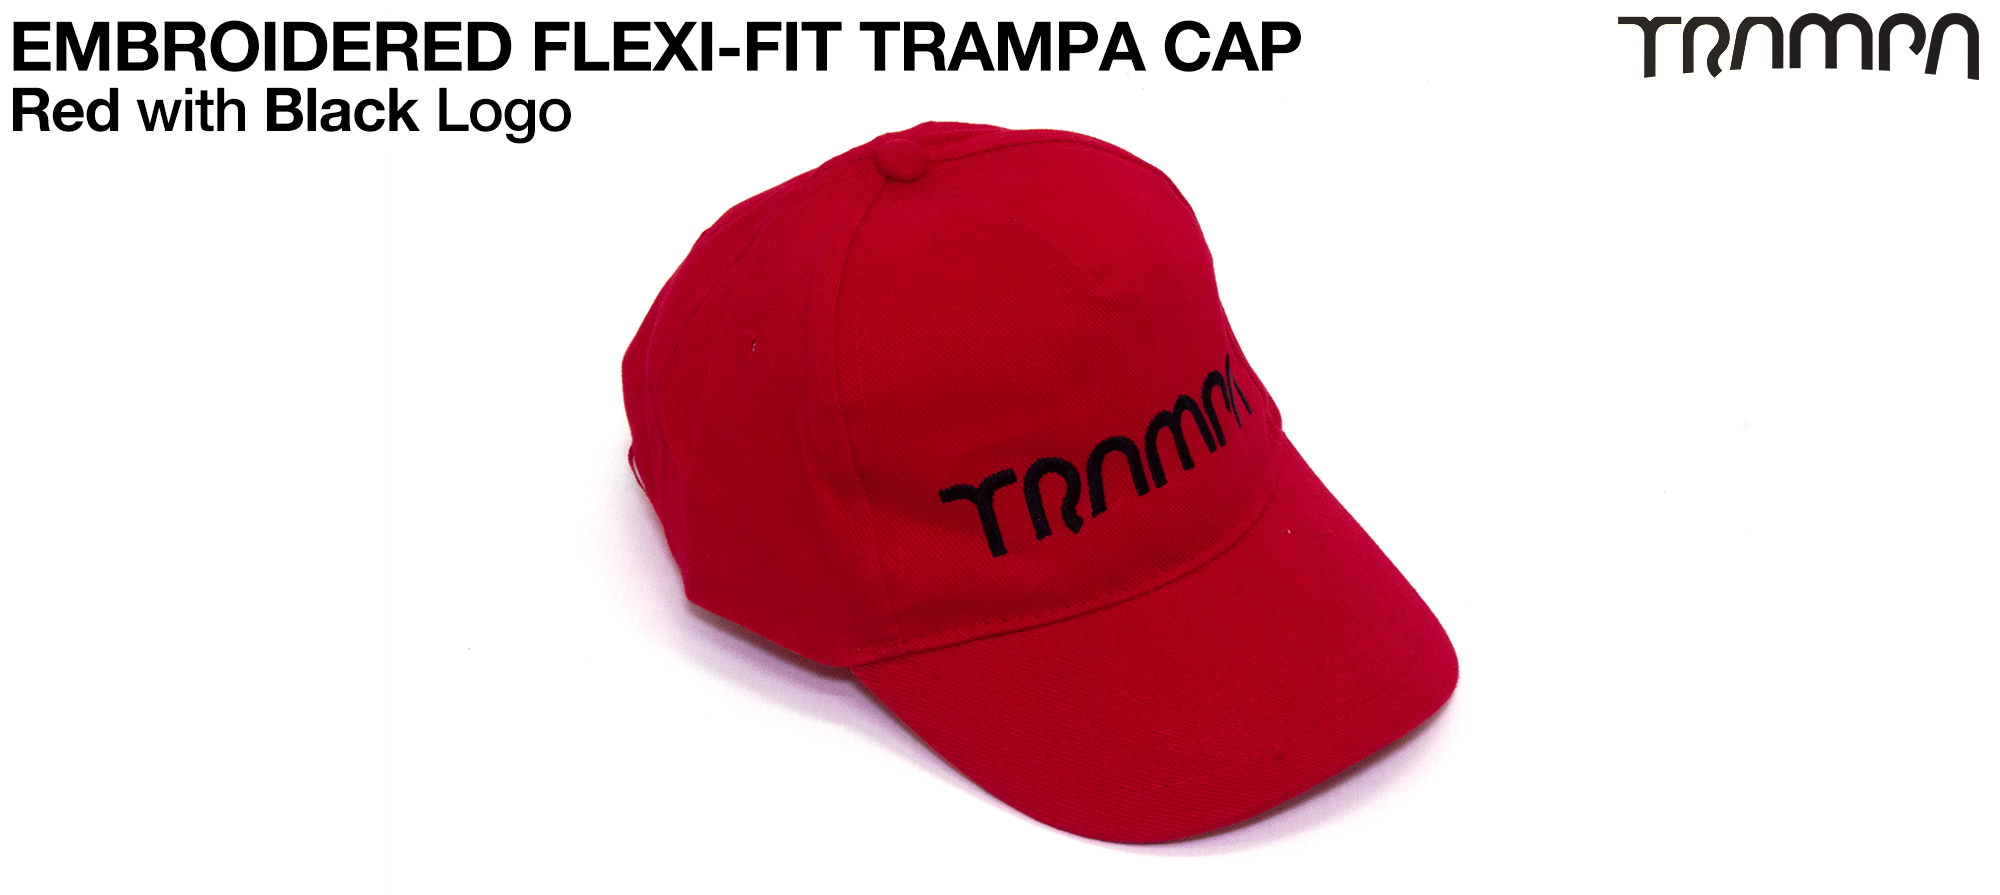 RED with BLACK Embroidered TRAMPA logo 5 Panel FLEXI-FIT Cap - SMALL/MEDIUM